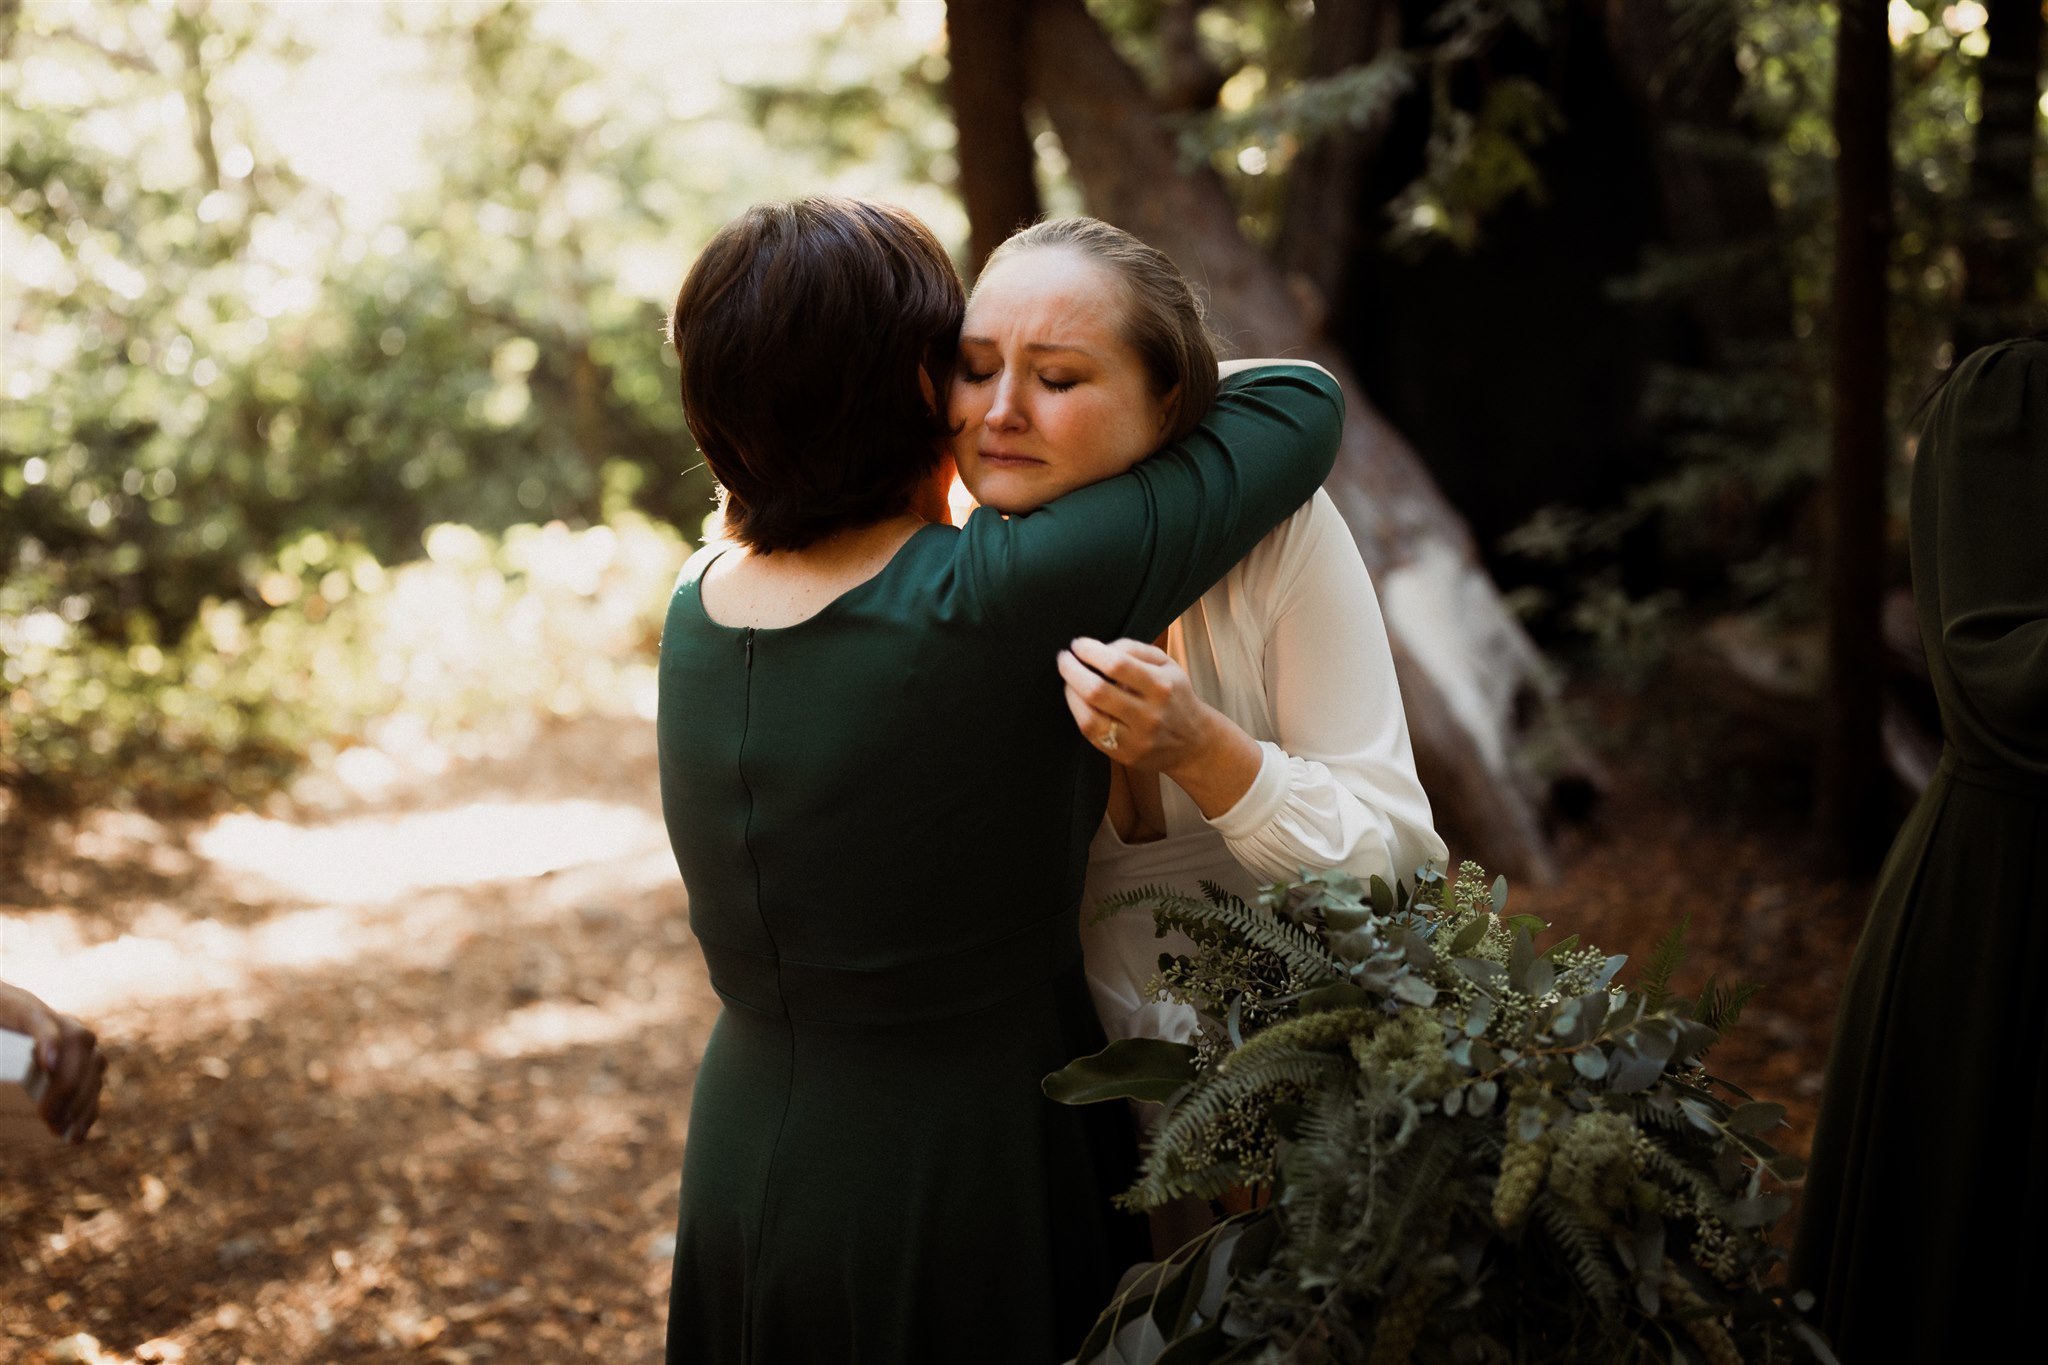 052_Two-Day Big Sur Redwoods Elopement with Family_Will Khoury Elopement Photographer.jpg